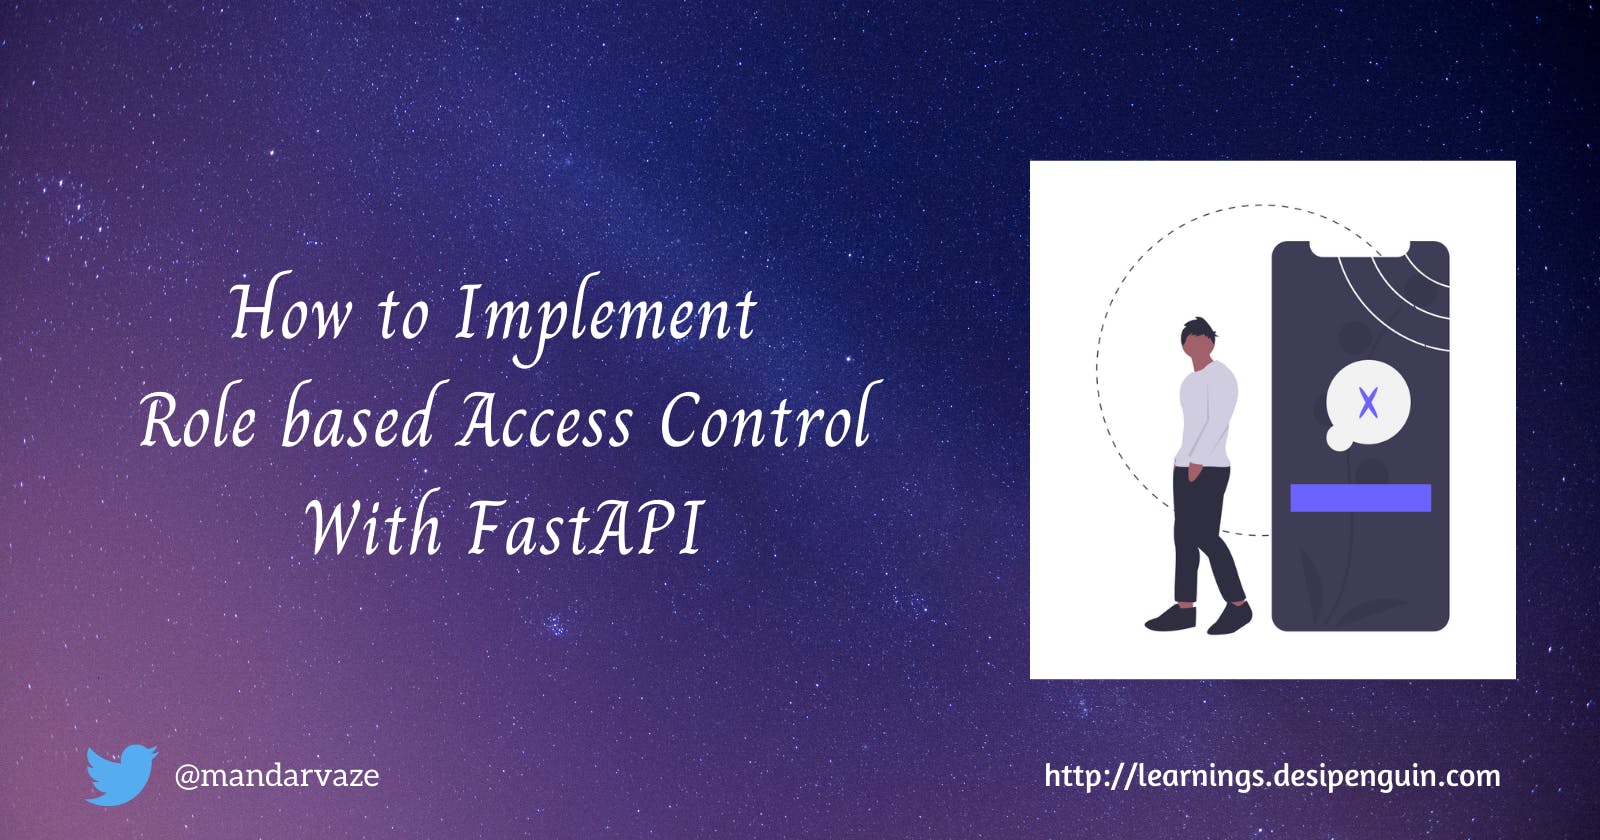 How to Implement Role based Access Control With FastAPI